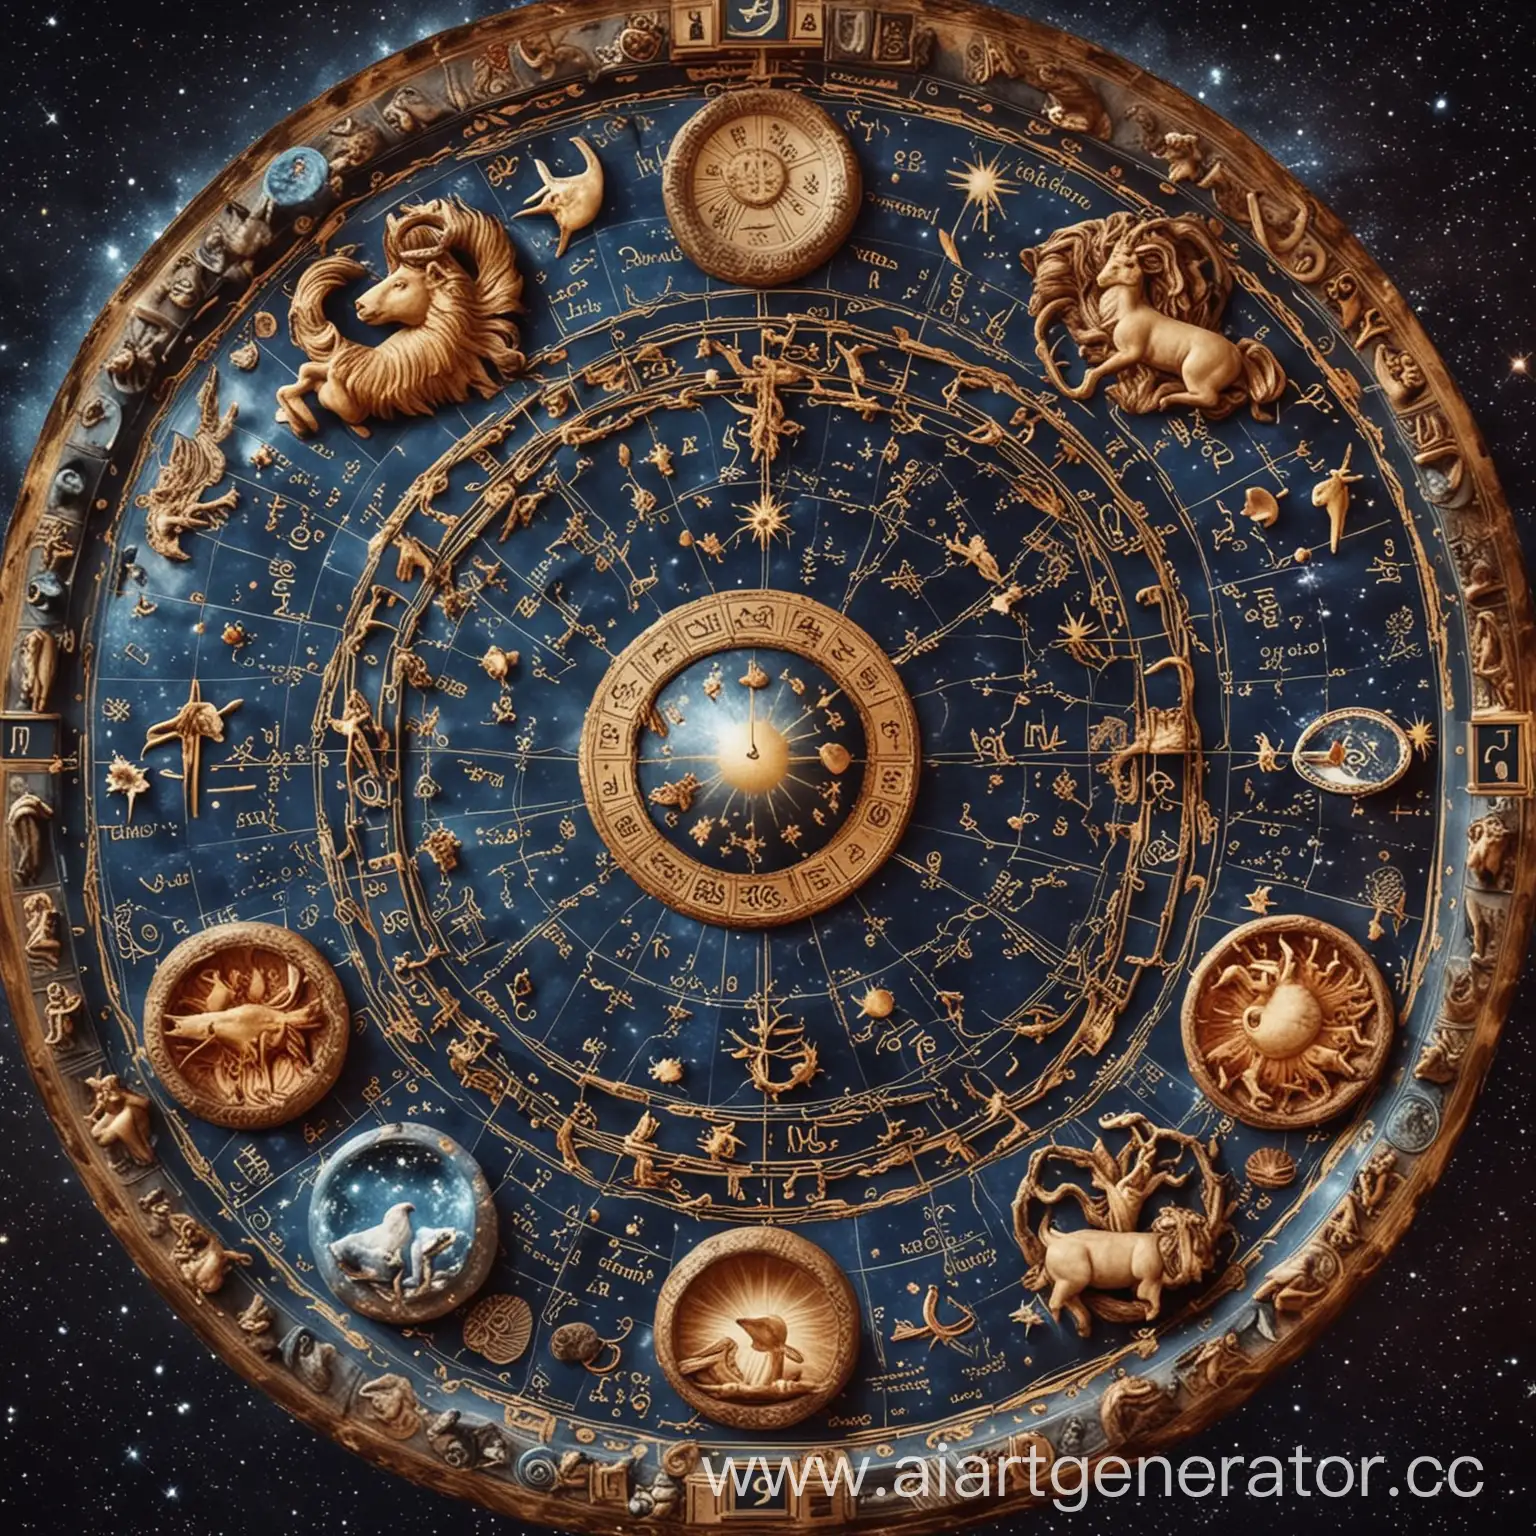 Zodiac-Signs-Illustrated-in-Vibrant-Astrological-Artwork